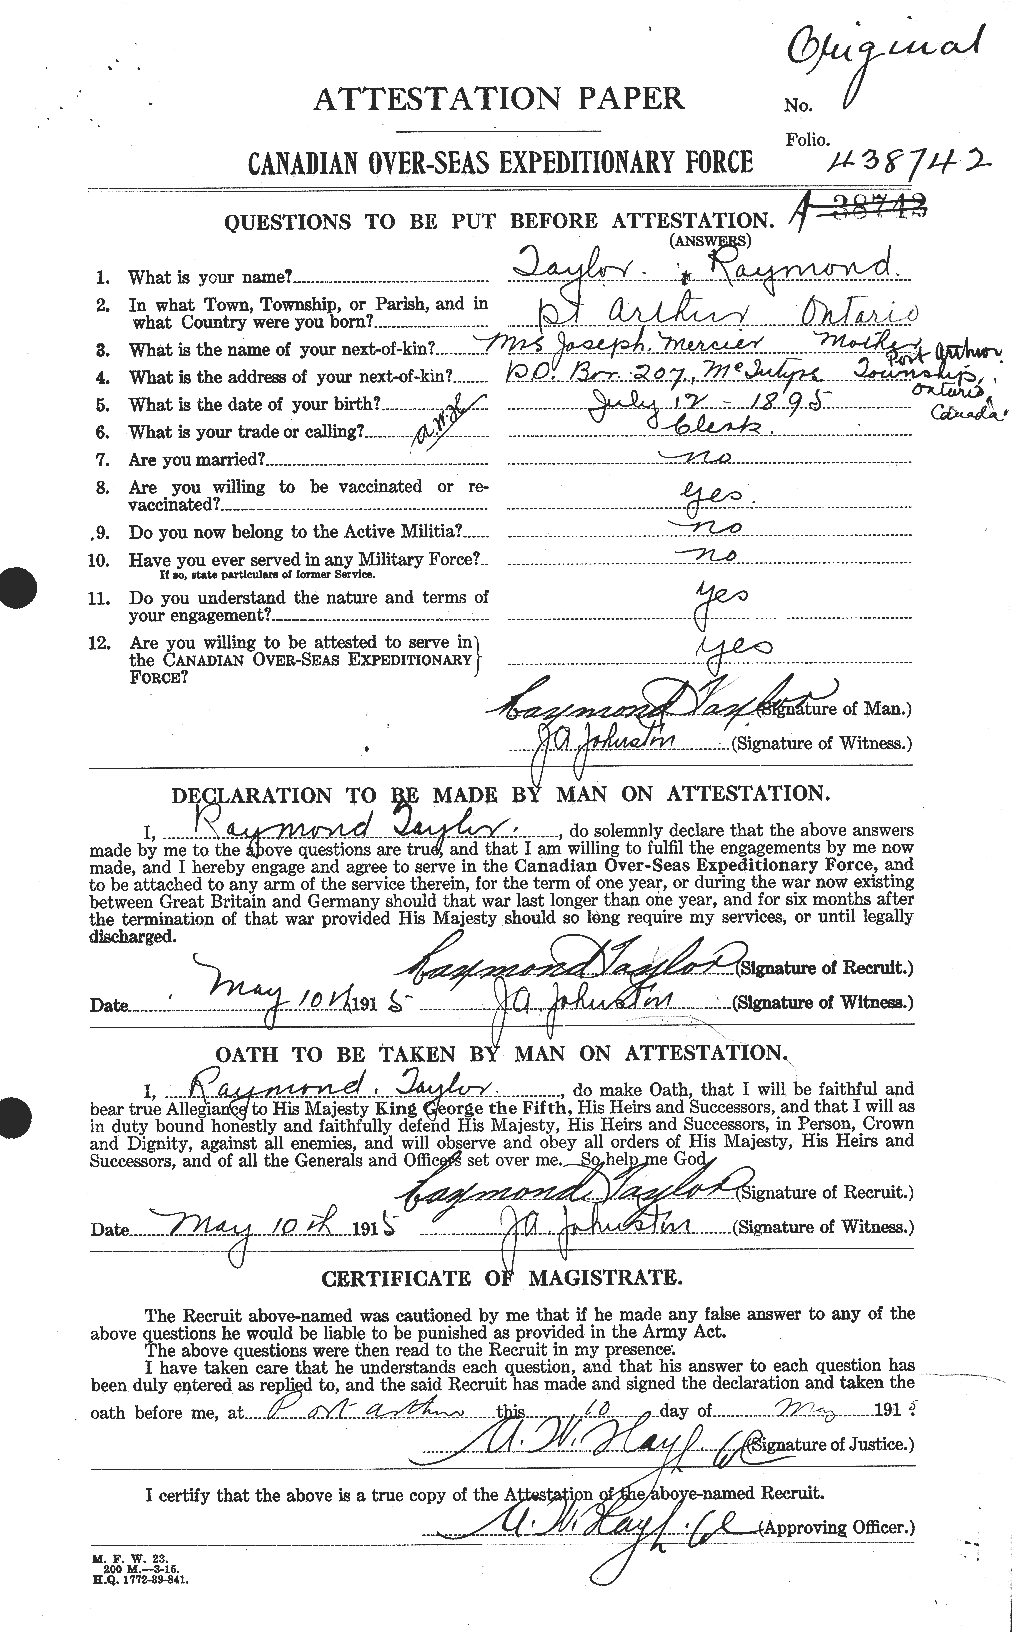 Personnel Records of the First World War - CEF 627795a